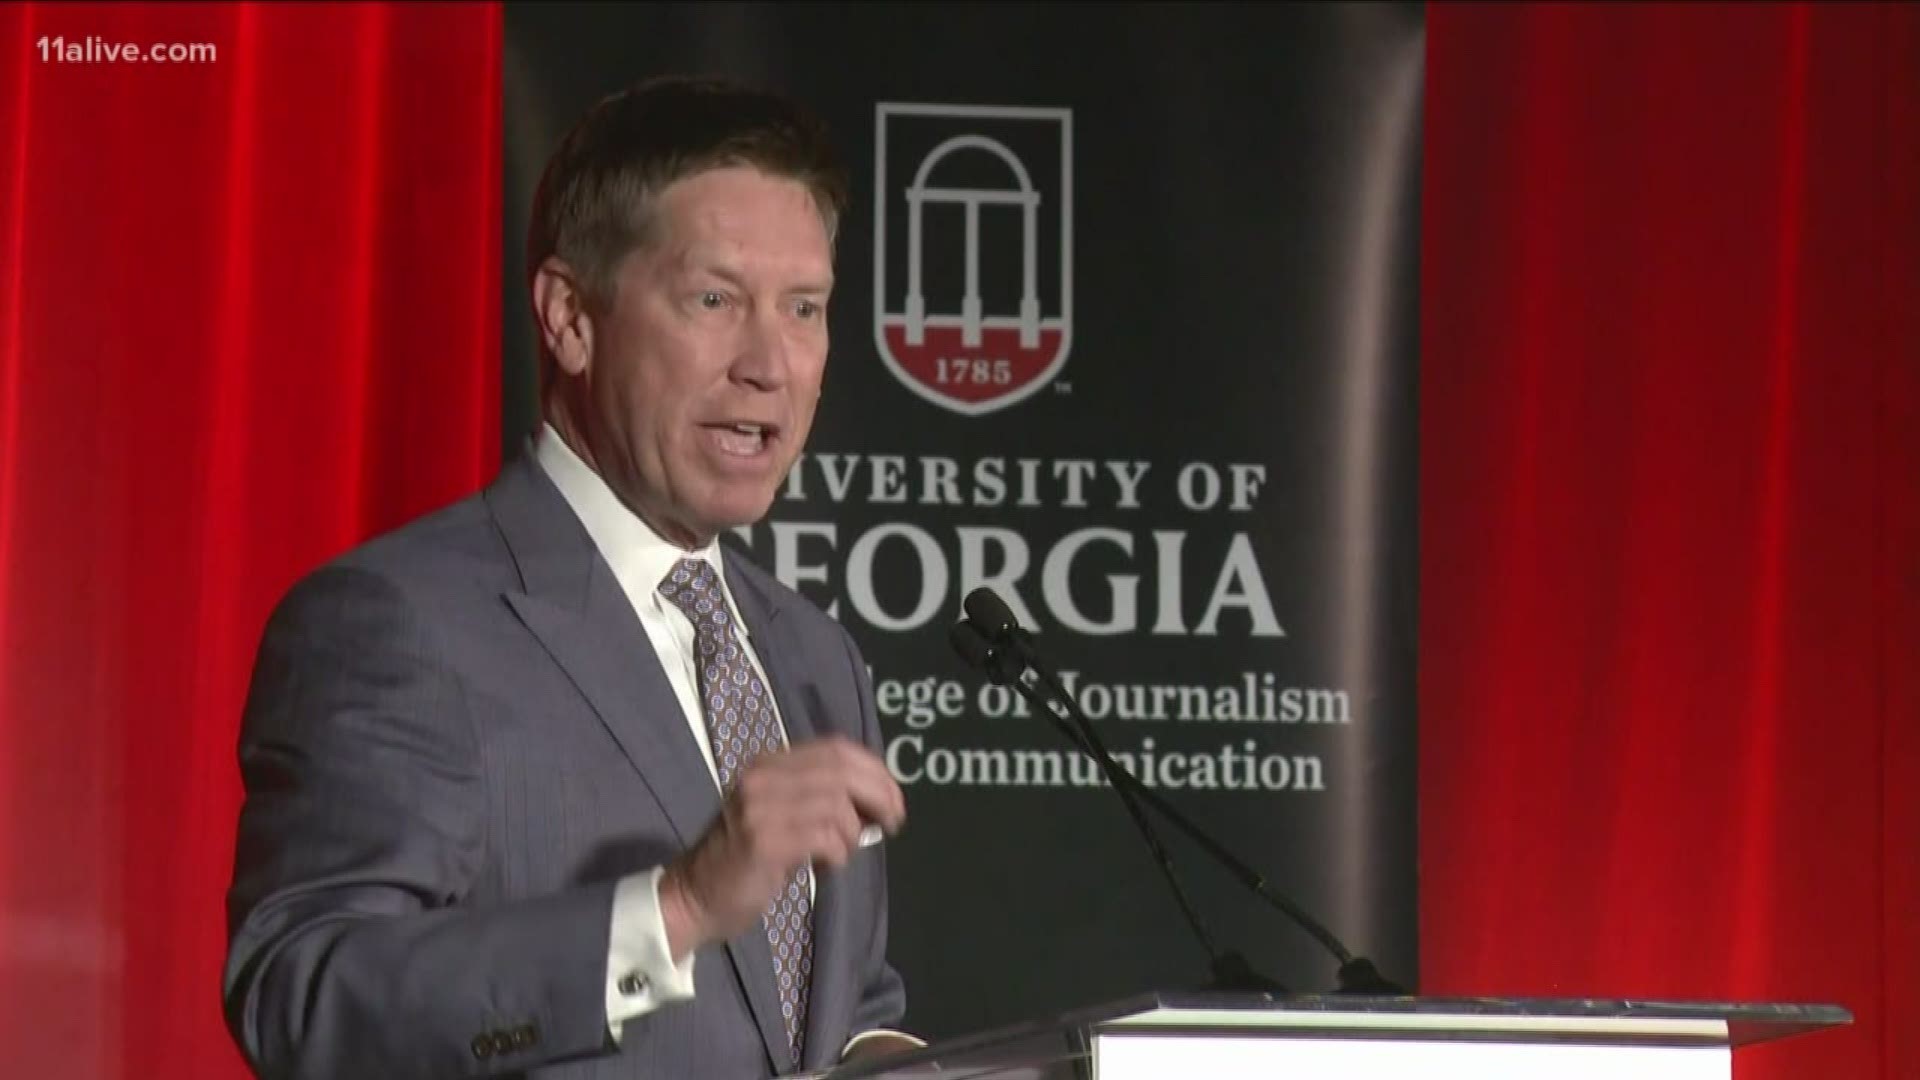 The 11Alive chief meteorologist received a lifetime achievement award from his alma mater, the University of Georgia.